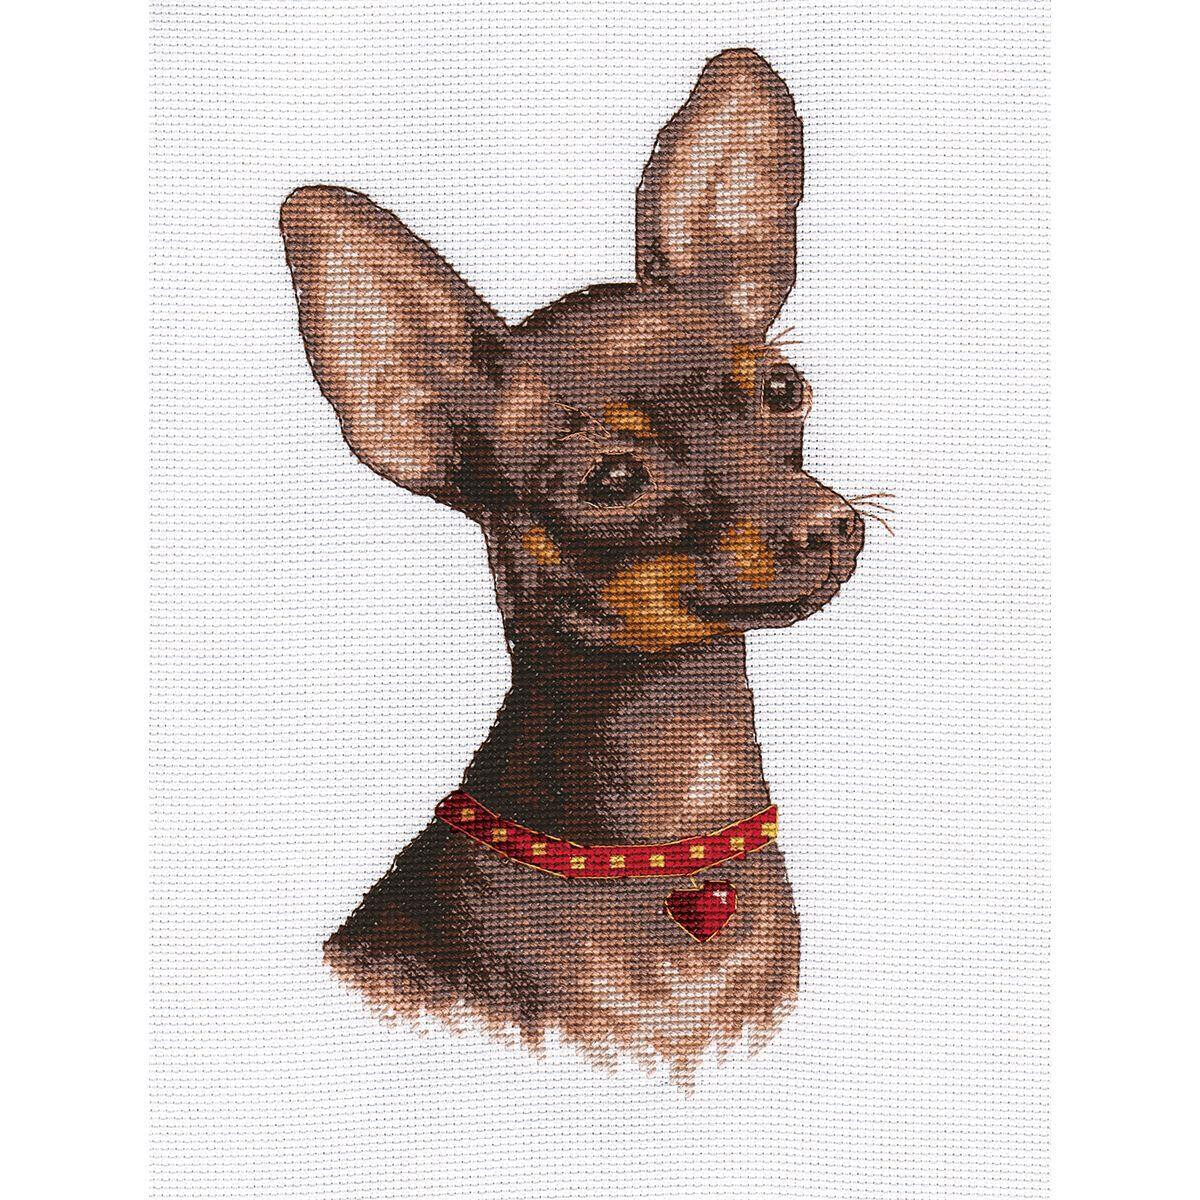 Panna counted cross stitch kit "Toy Terrier"...